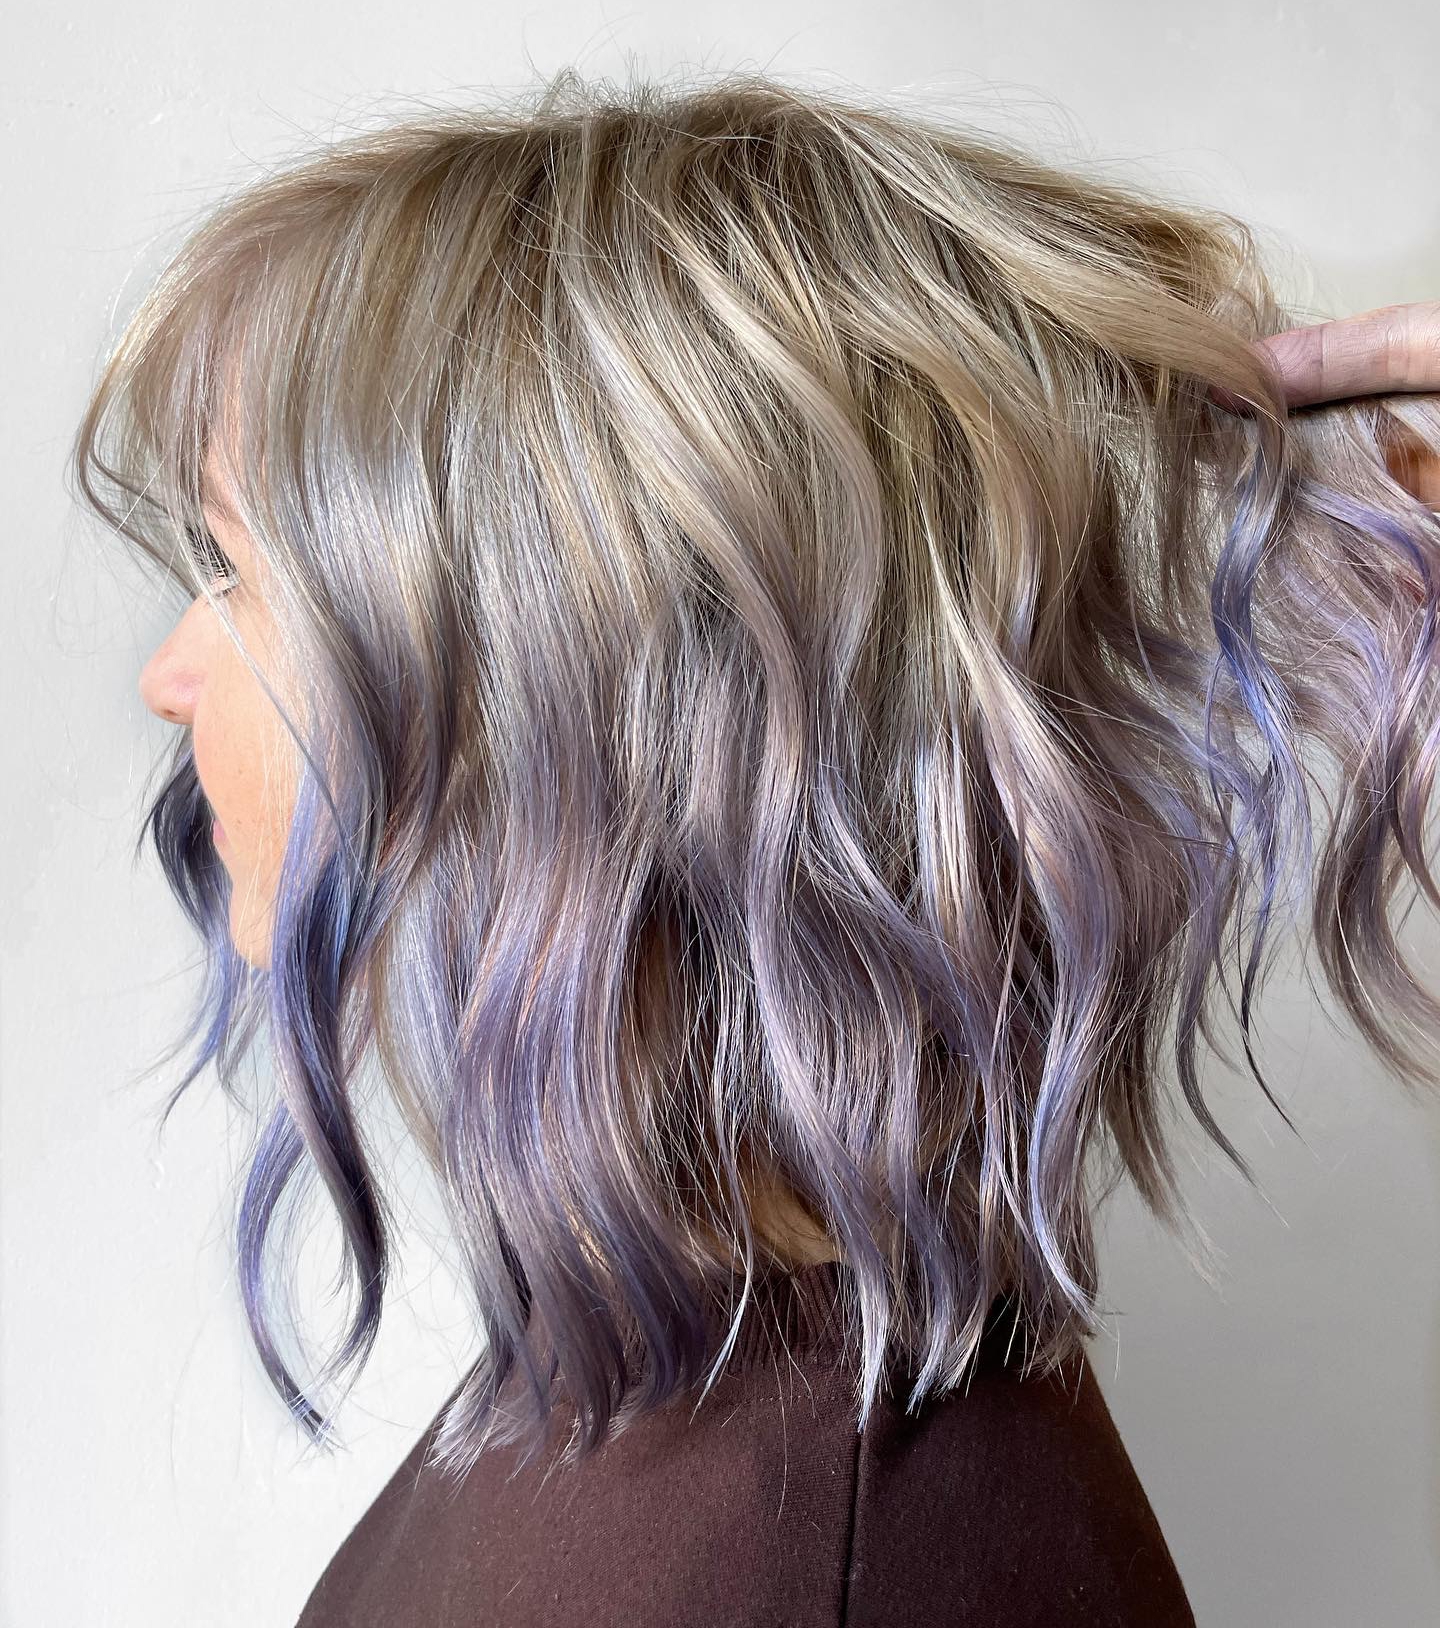 Bob Cut on Blonde Hair with Lavender Ends